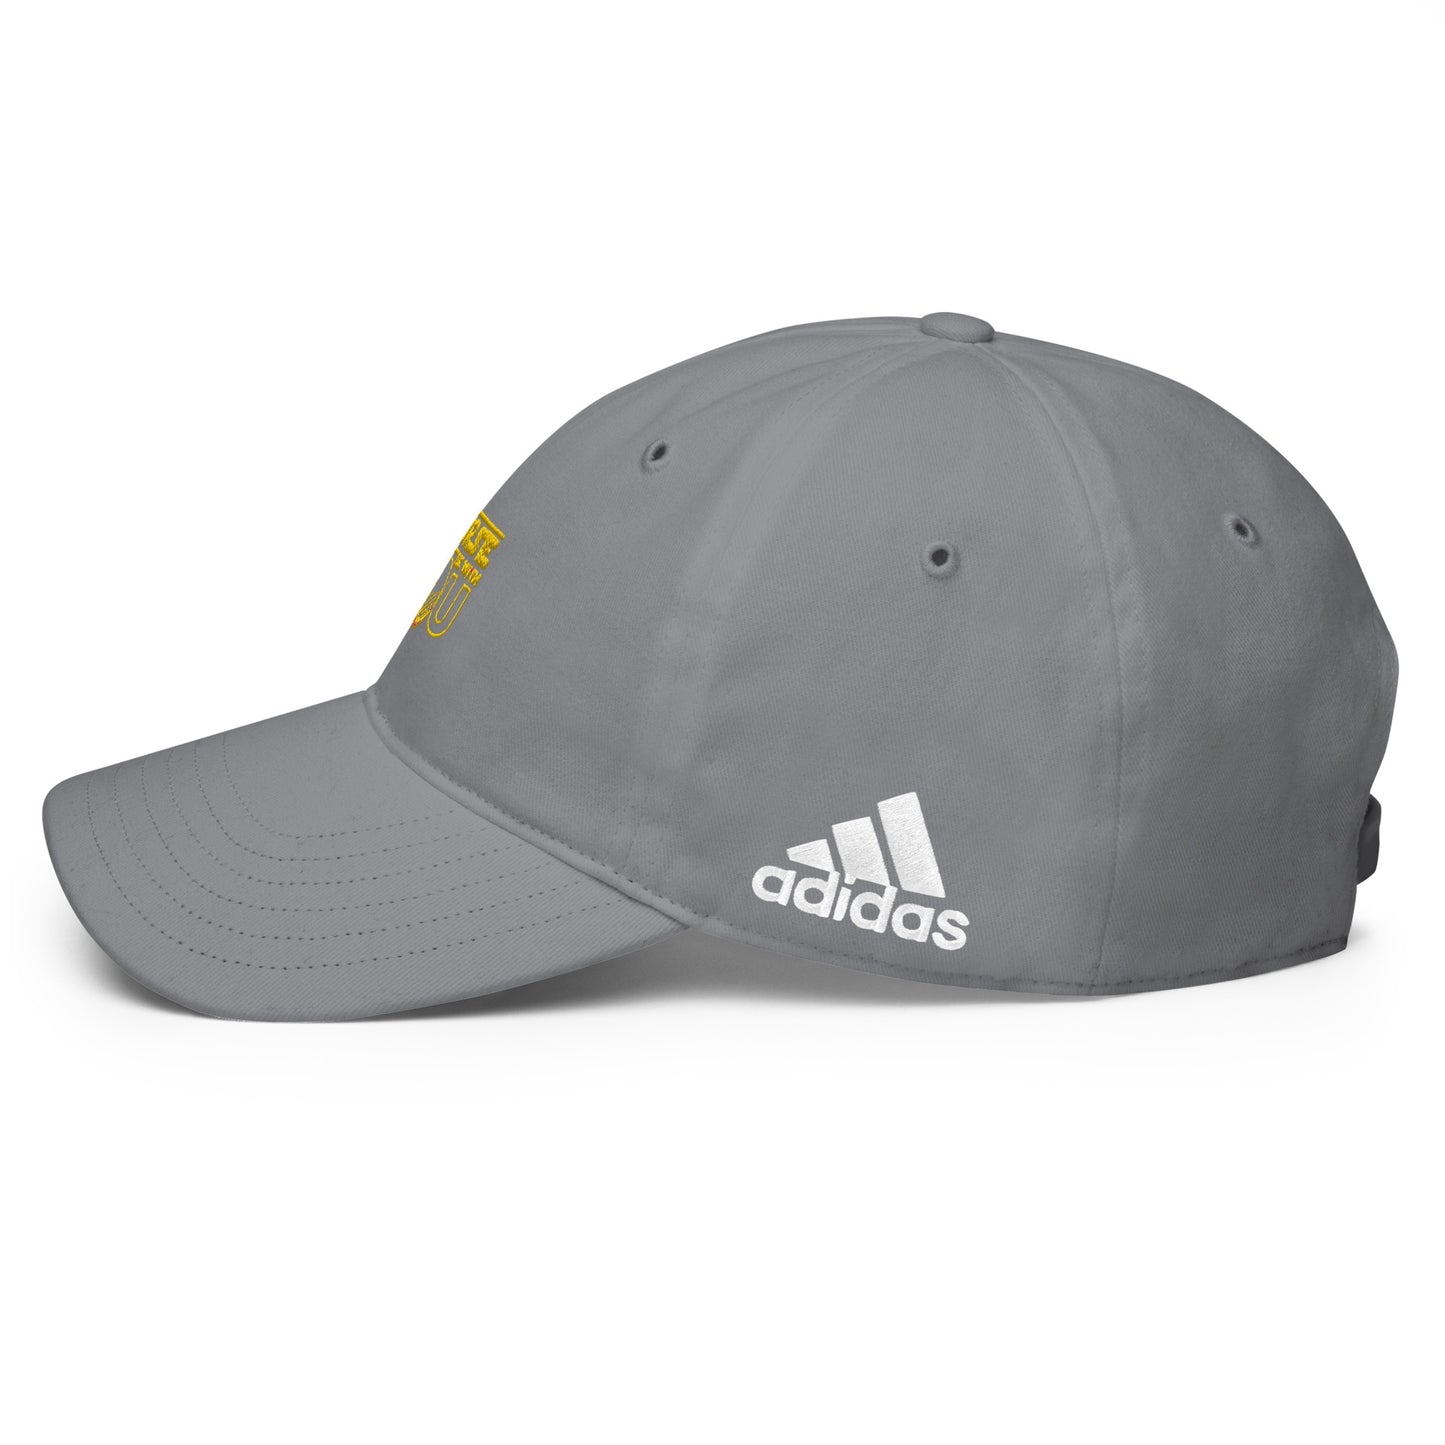 Adidas 'May The Course Be With You' Performance Golf Cap